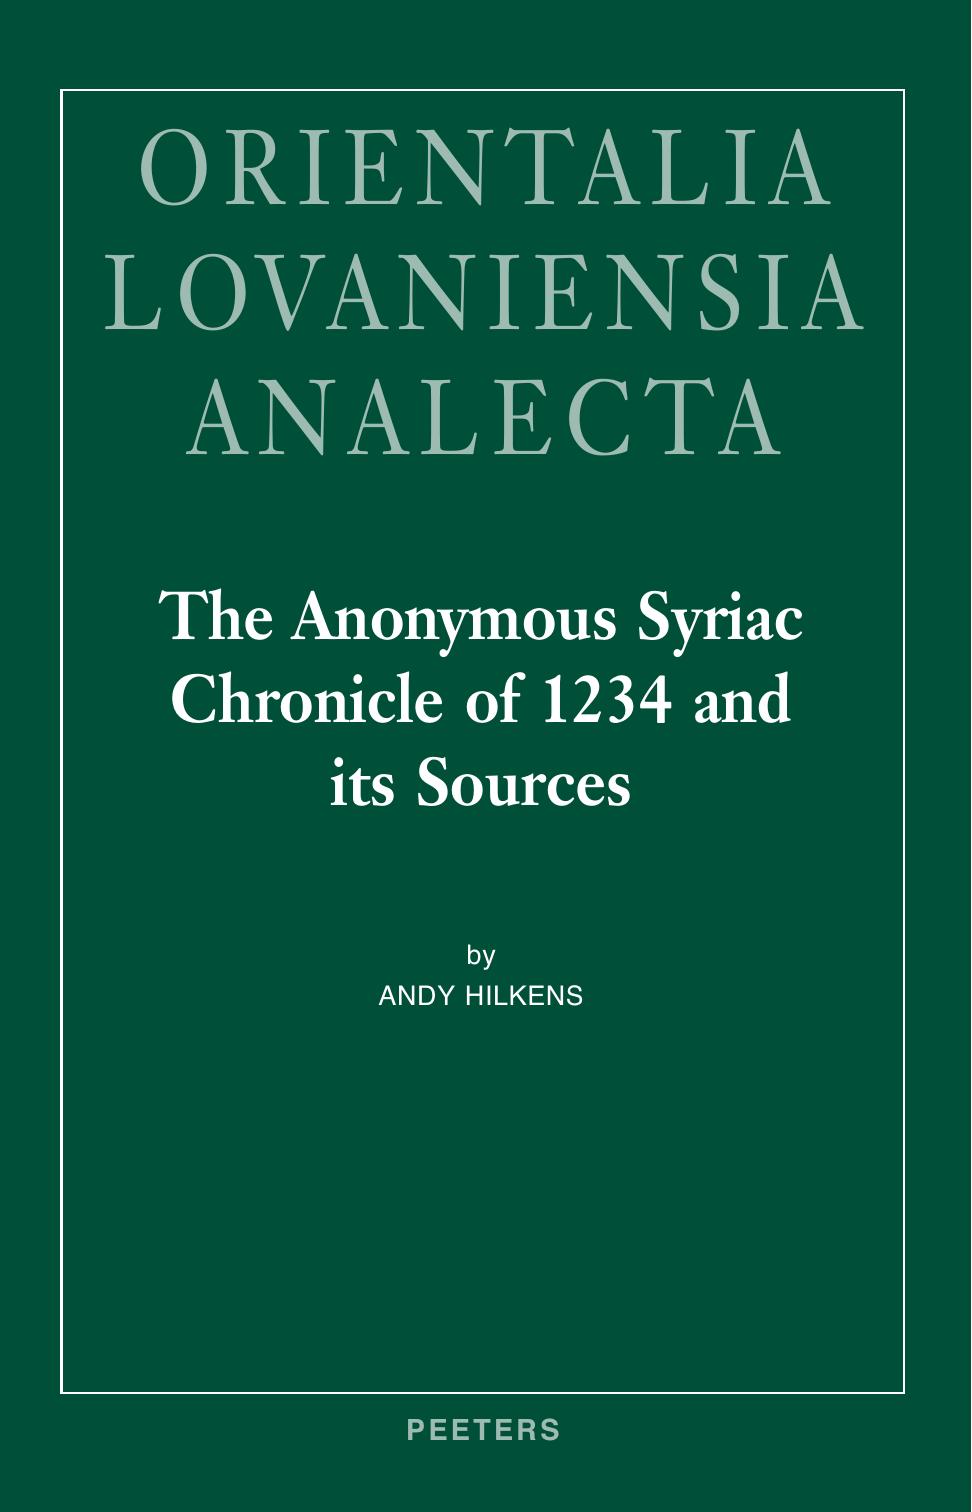 The Anonymous Syriac Chronicle of 1234 and its Sources (Orientalia Lovaniensia Analecta) by A. Hilkens